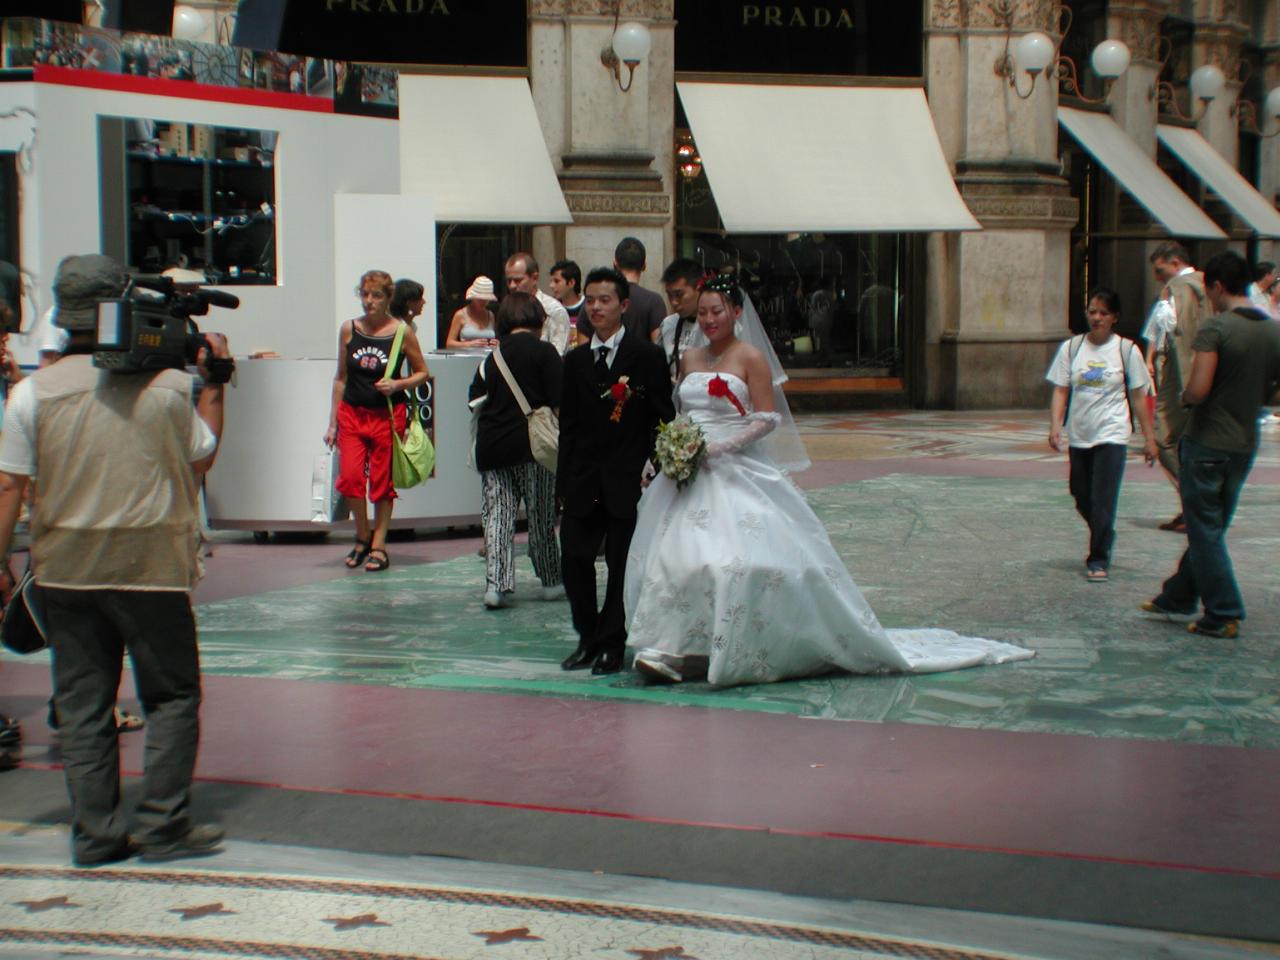 Some sort of Asian wedding holiday,  complete with video recording